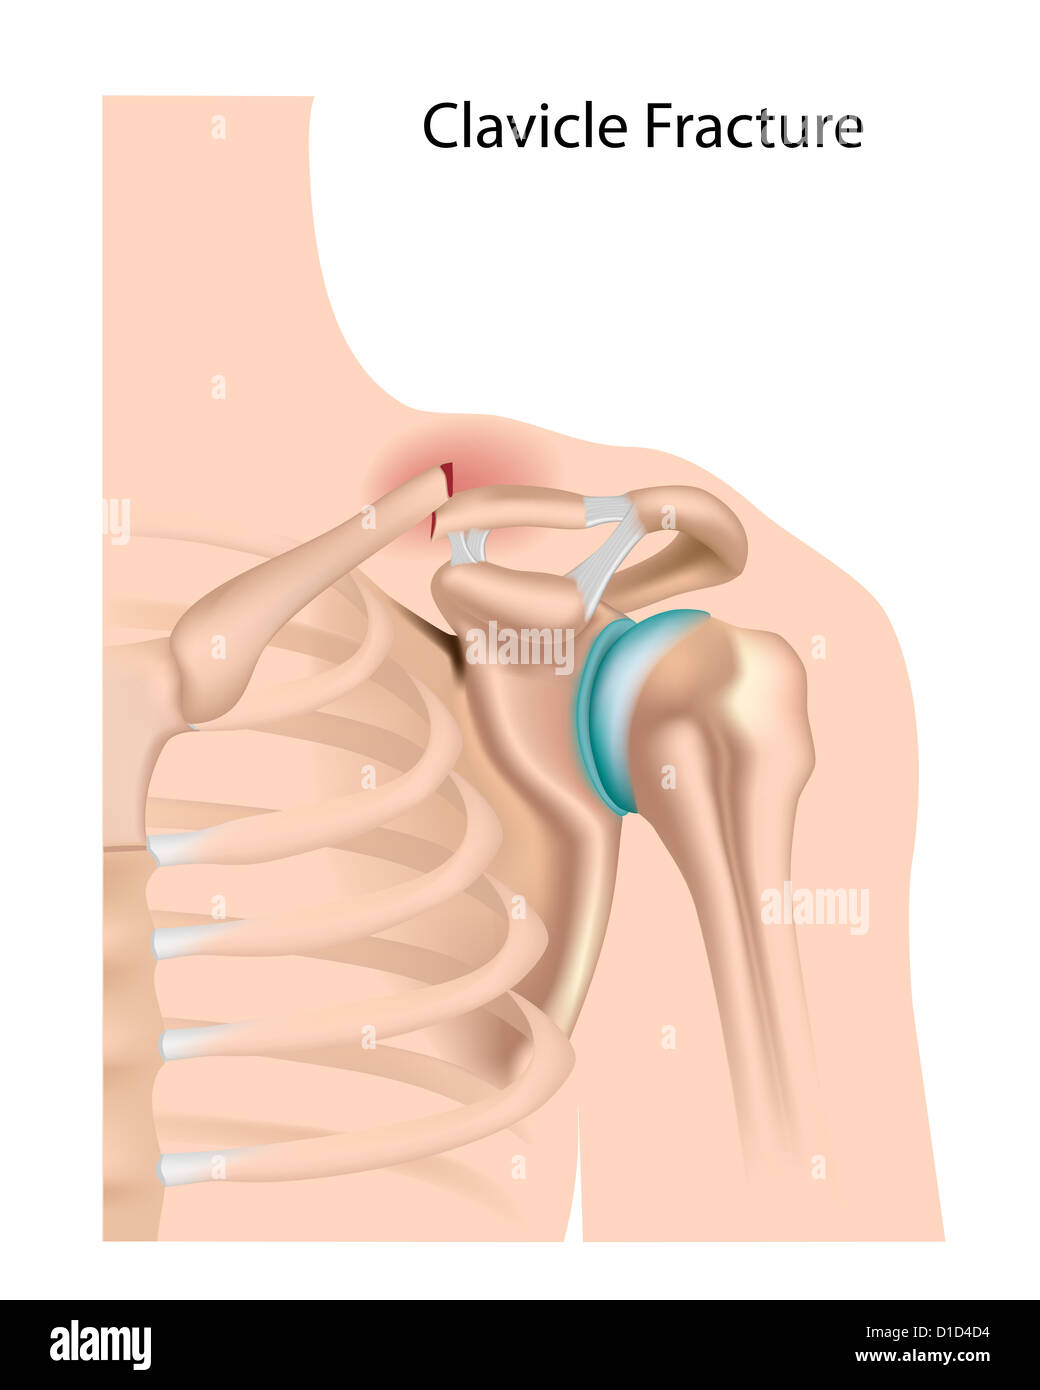 Clavicle fracture Stock Photo